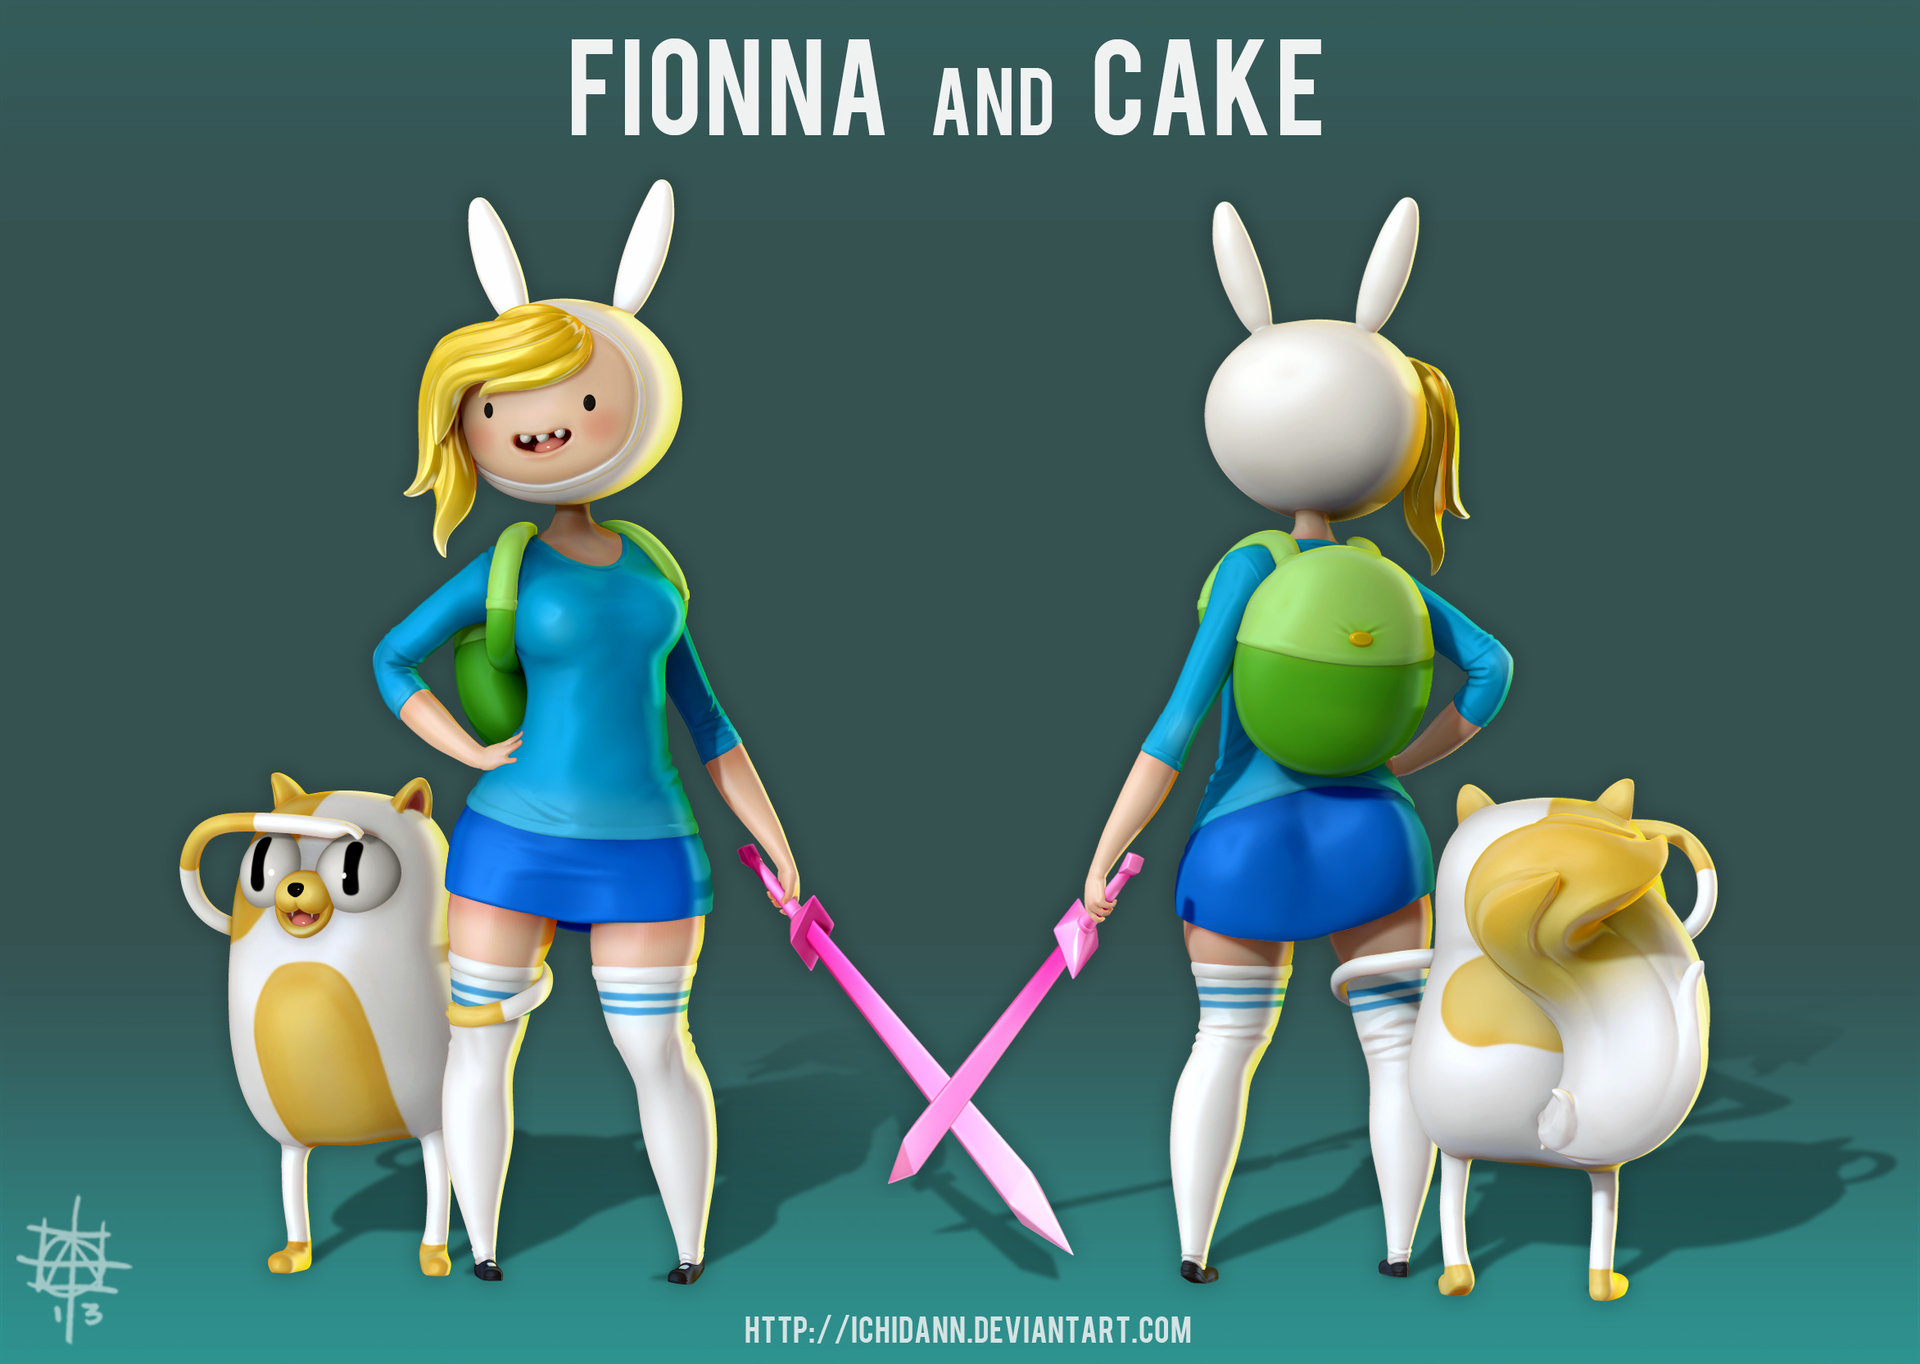 Some Fionna and Cake fanart that i decided to do! 